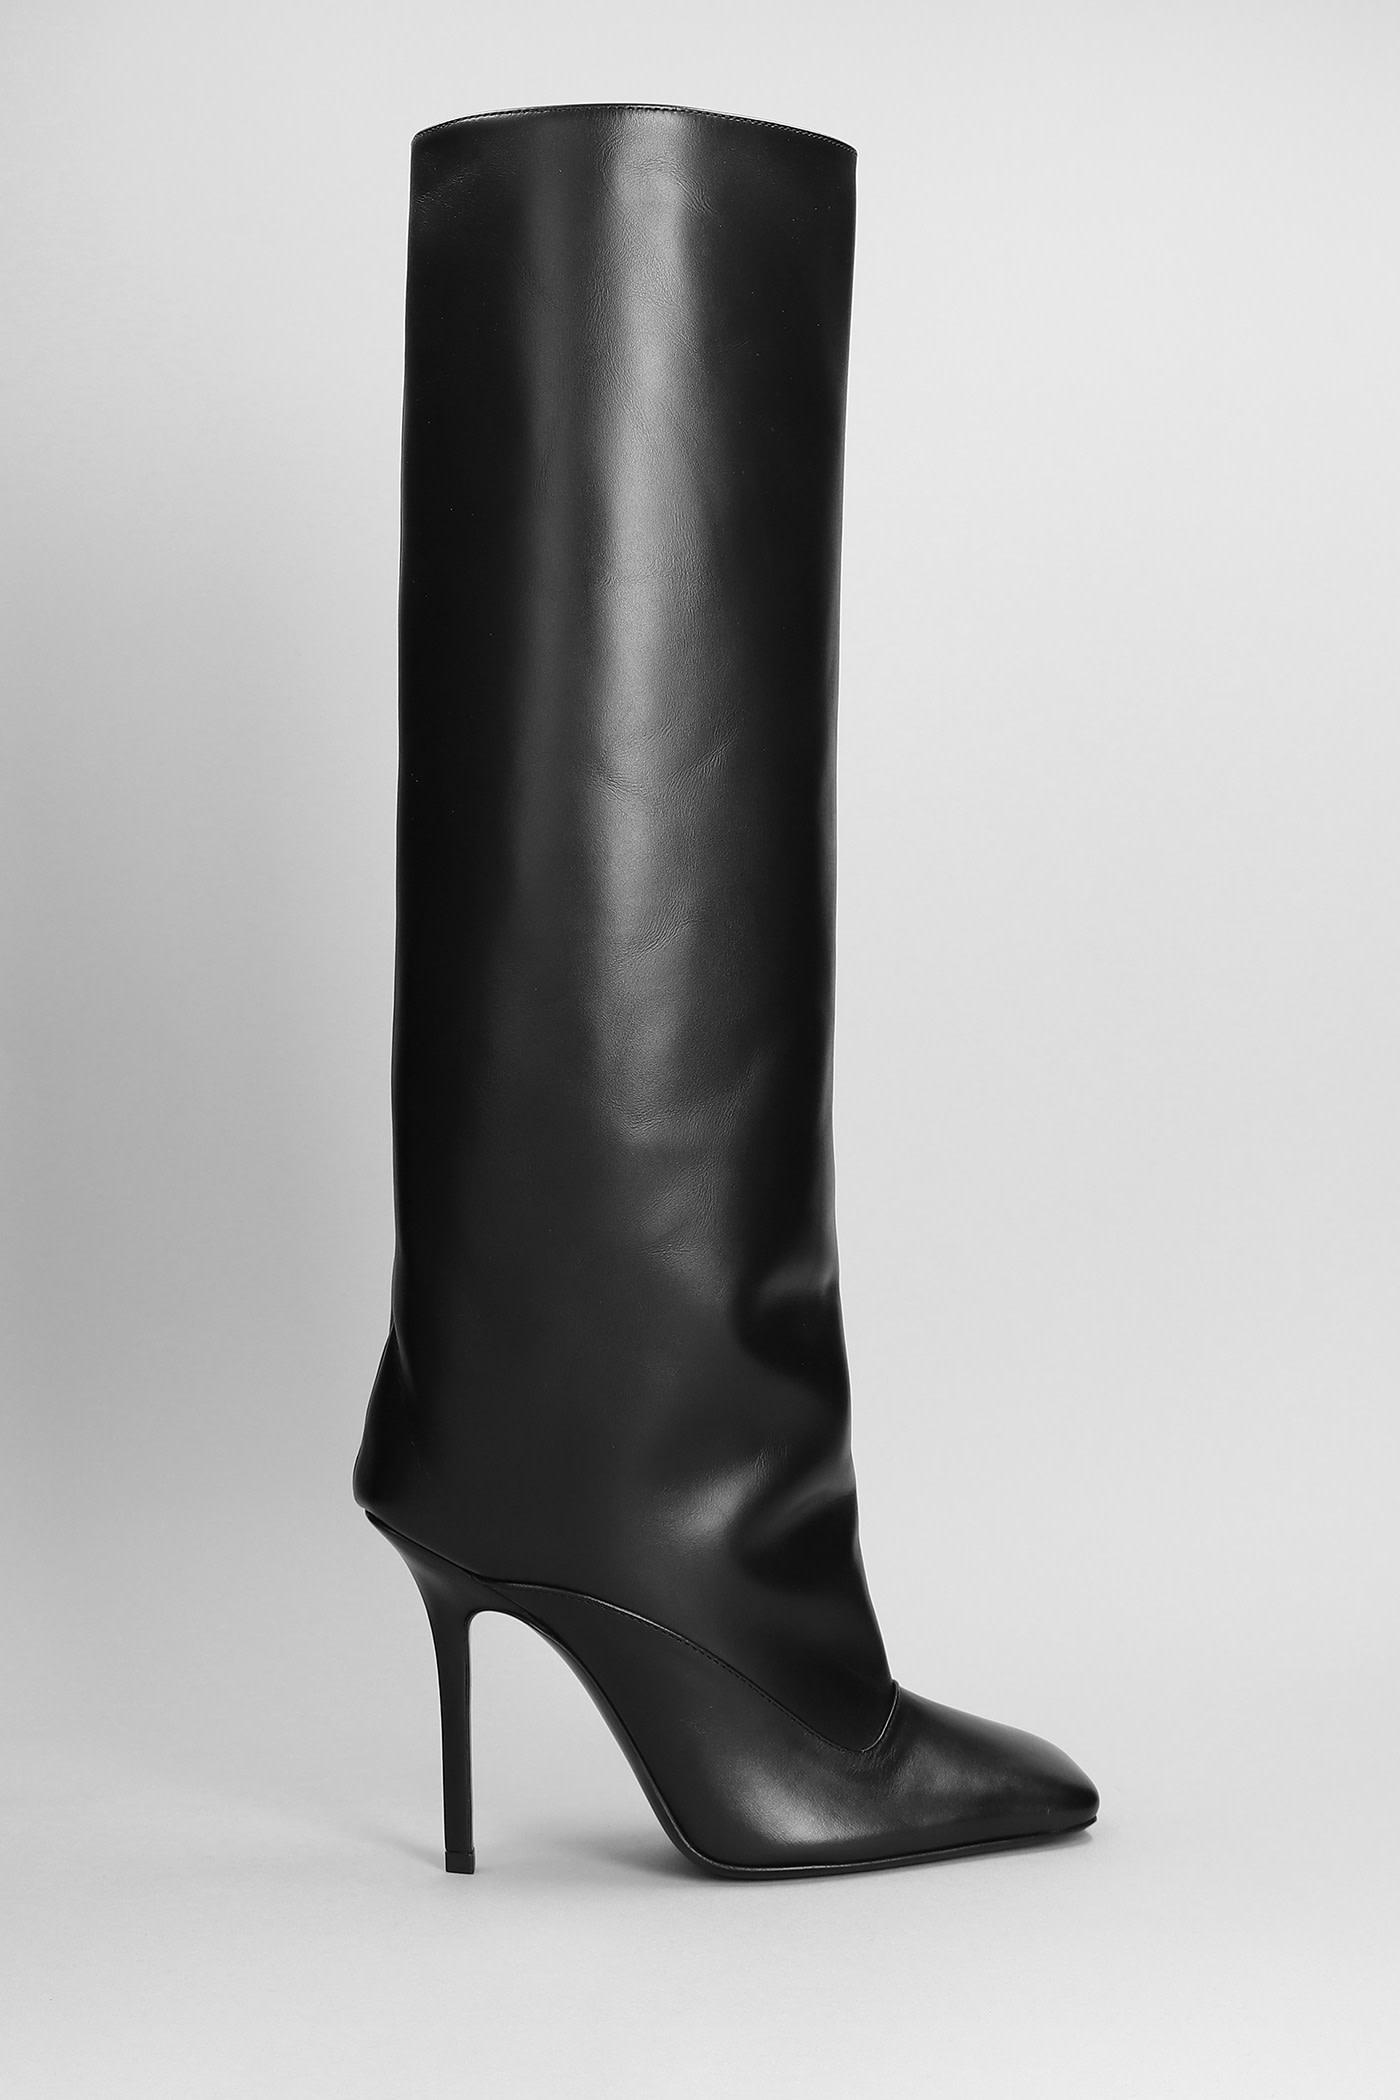 Sienna High Heels Boots In Black Leather